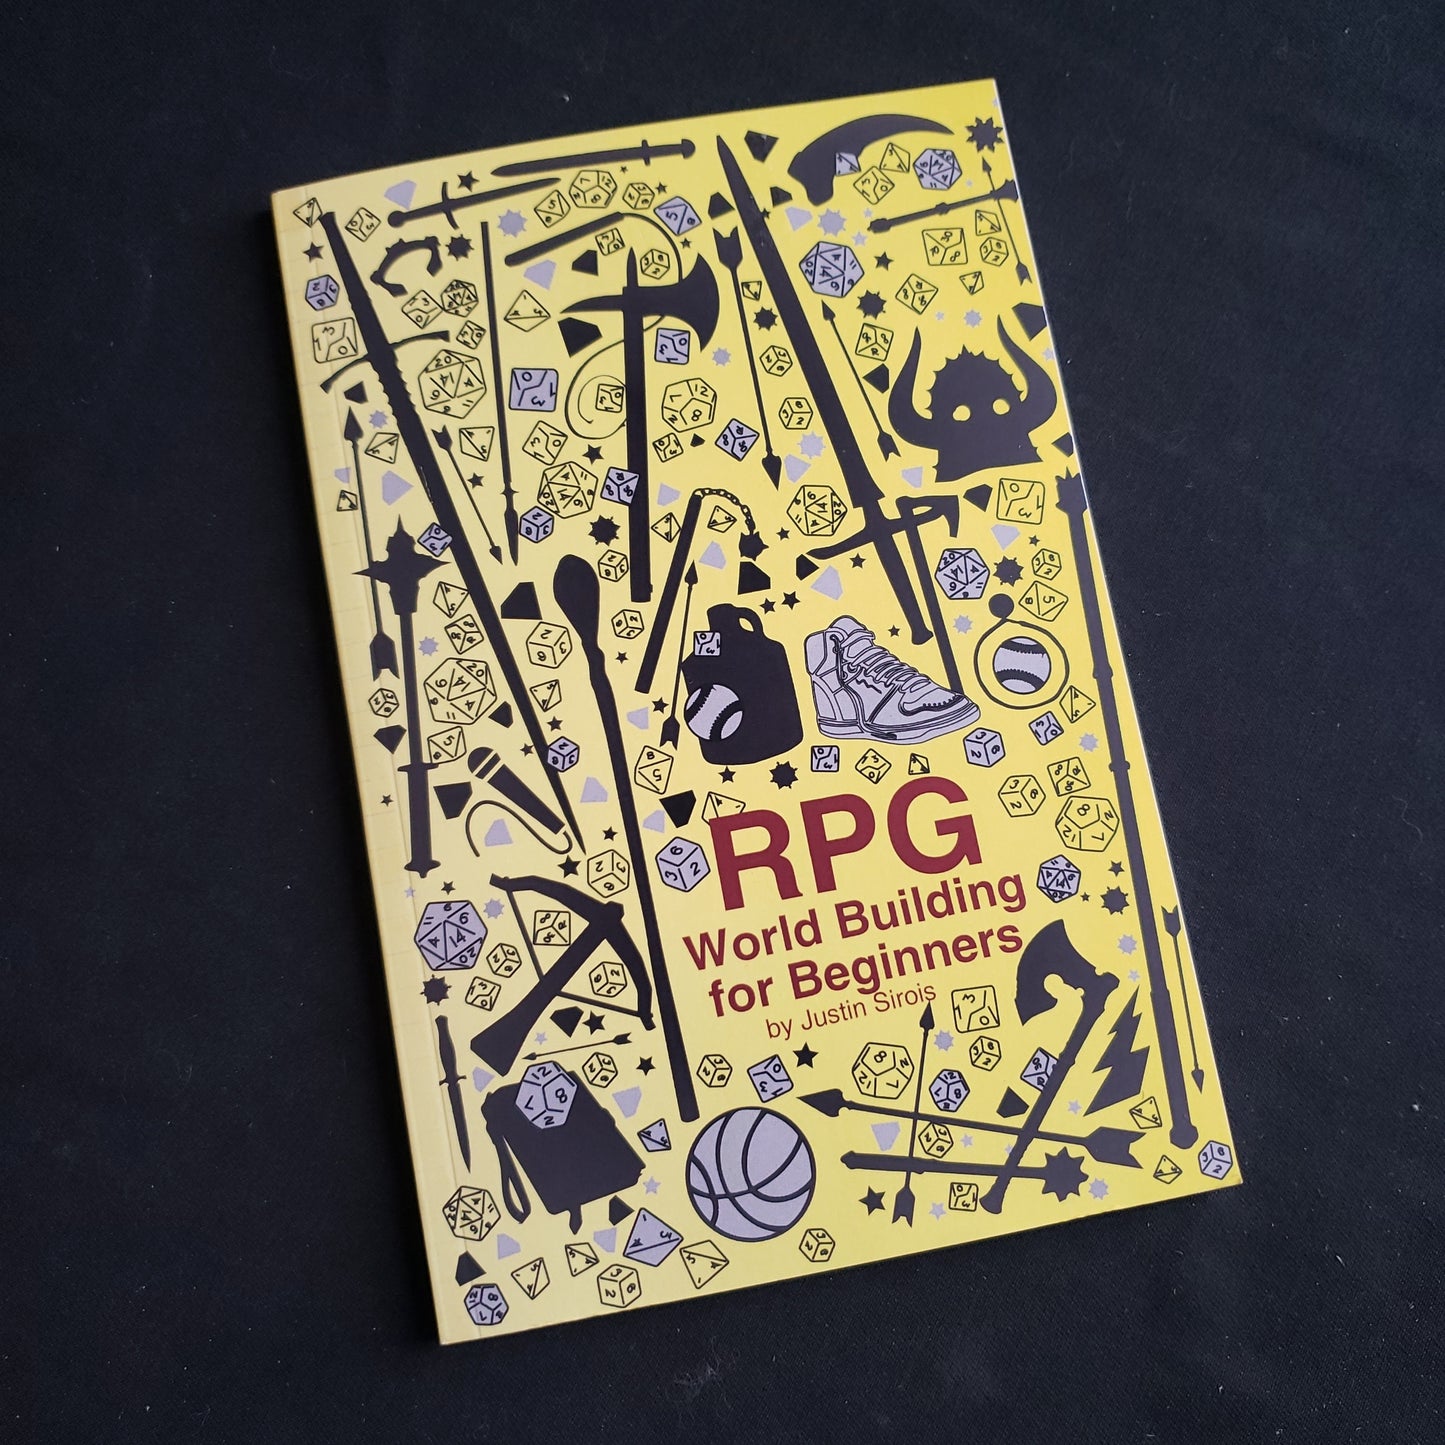 Image shows the front cover of the RPG World Building For Beginners roleplaying game book